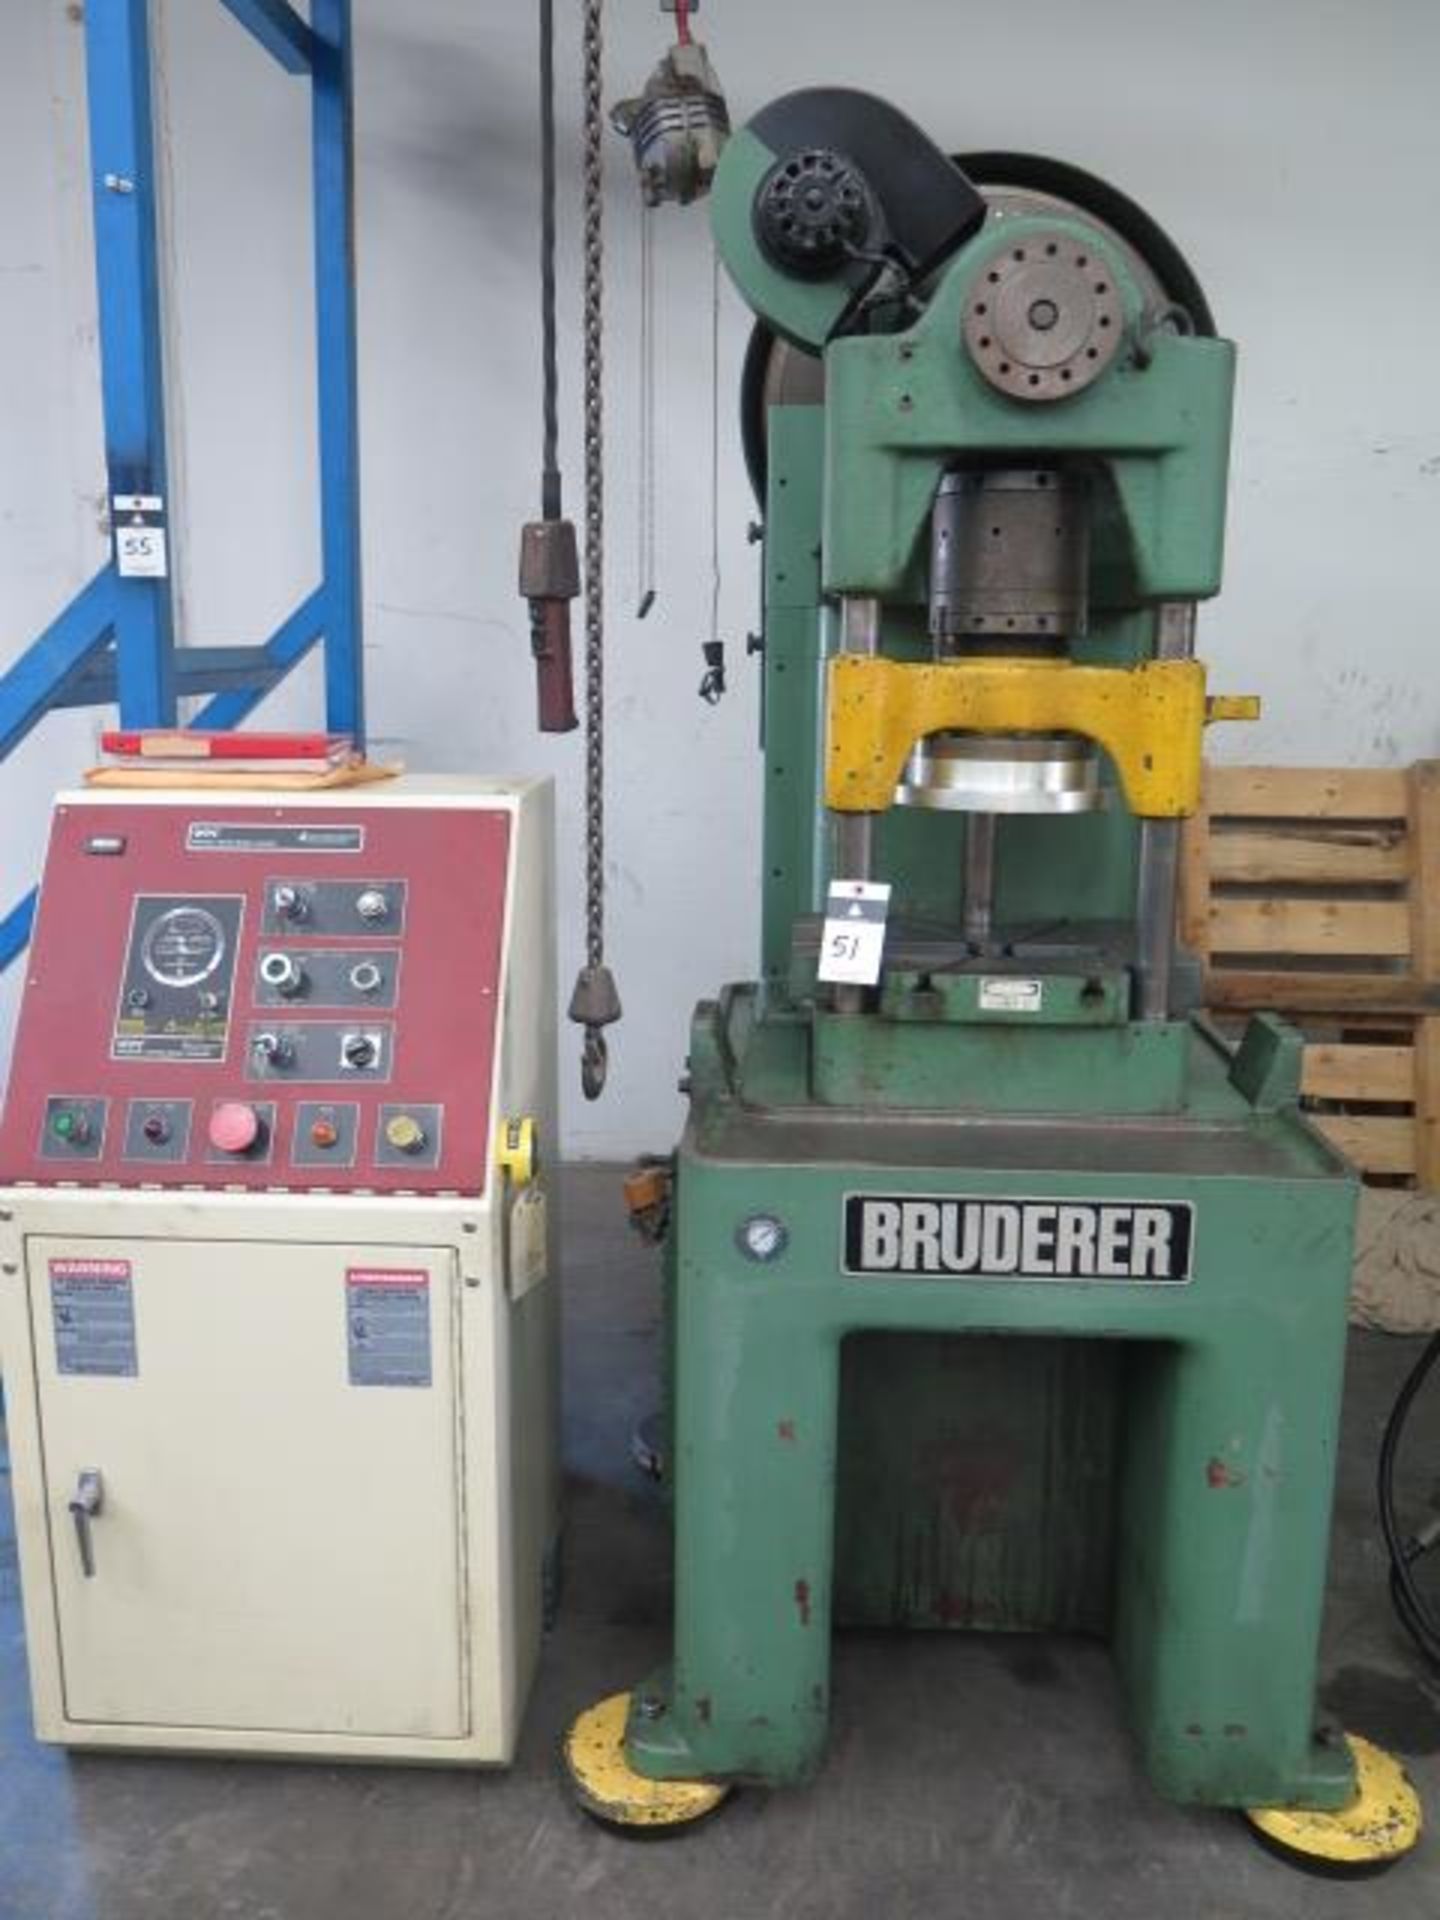 Bruderer BTSA-30 30-Ton High Speed Stamping Press s/n NA w/ Wintriss Data Instruments Clutch and